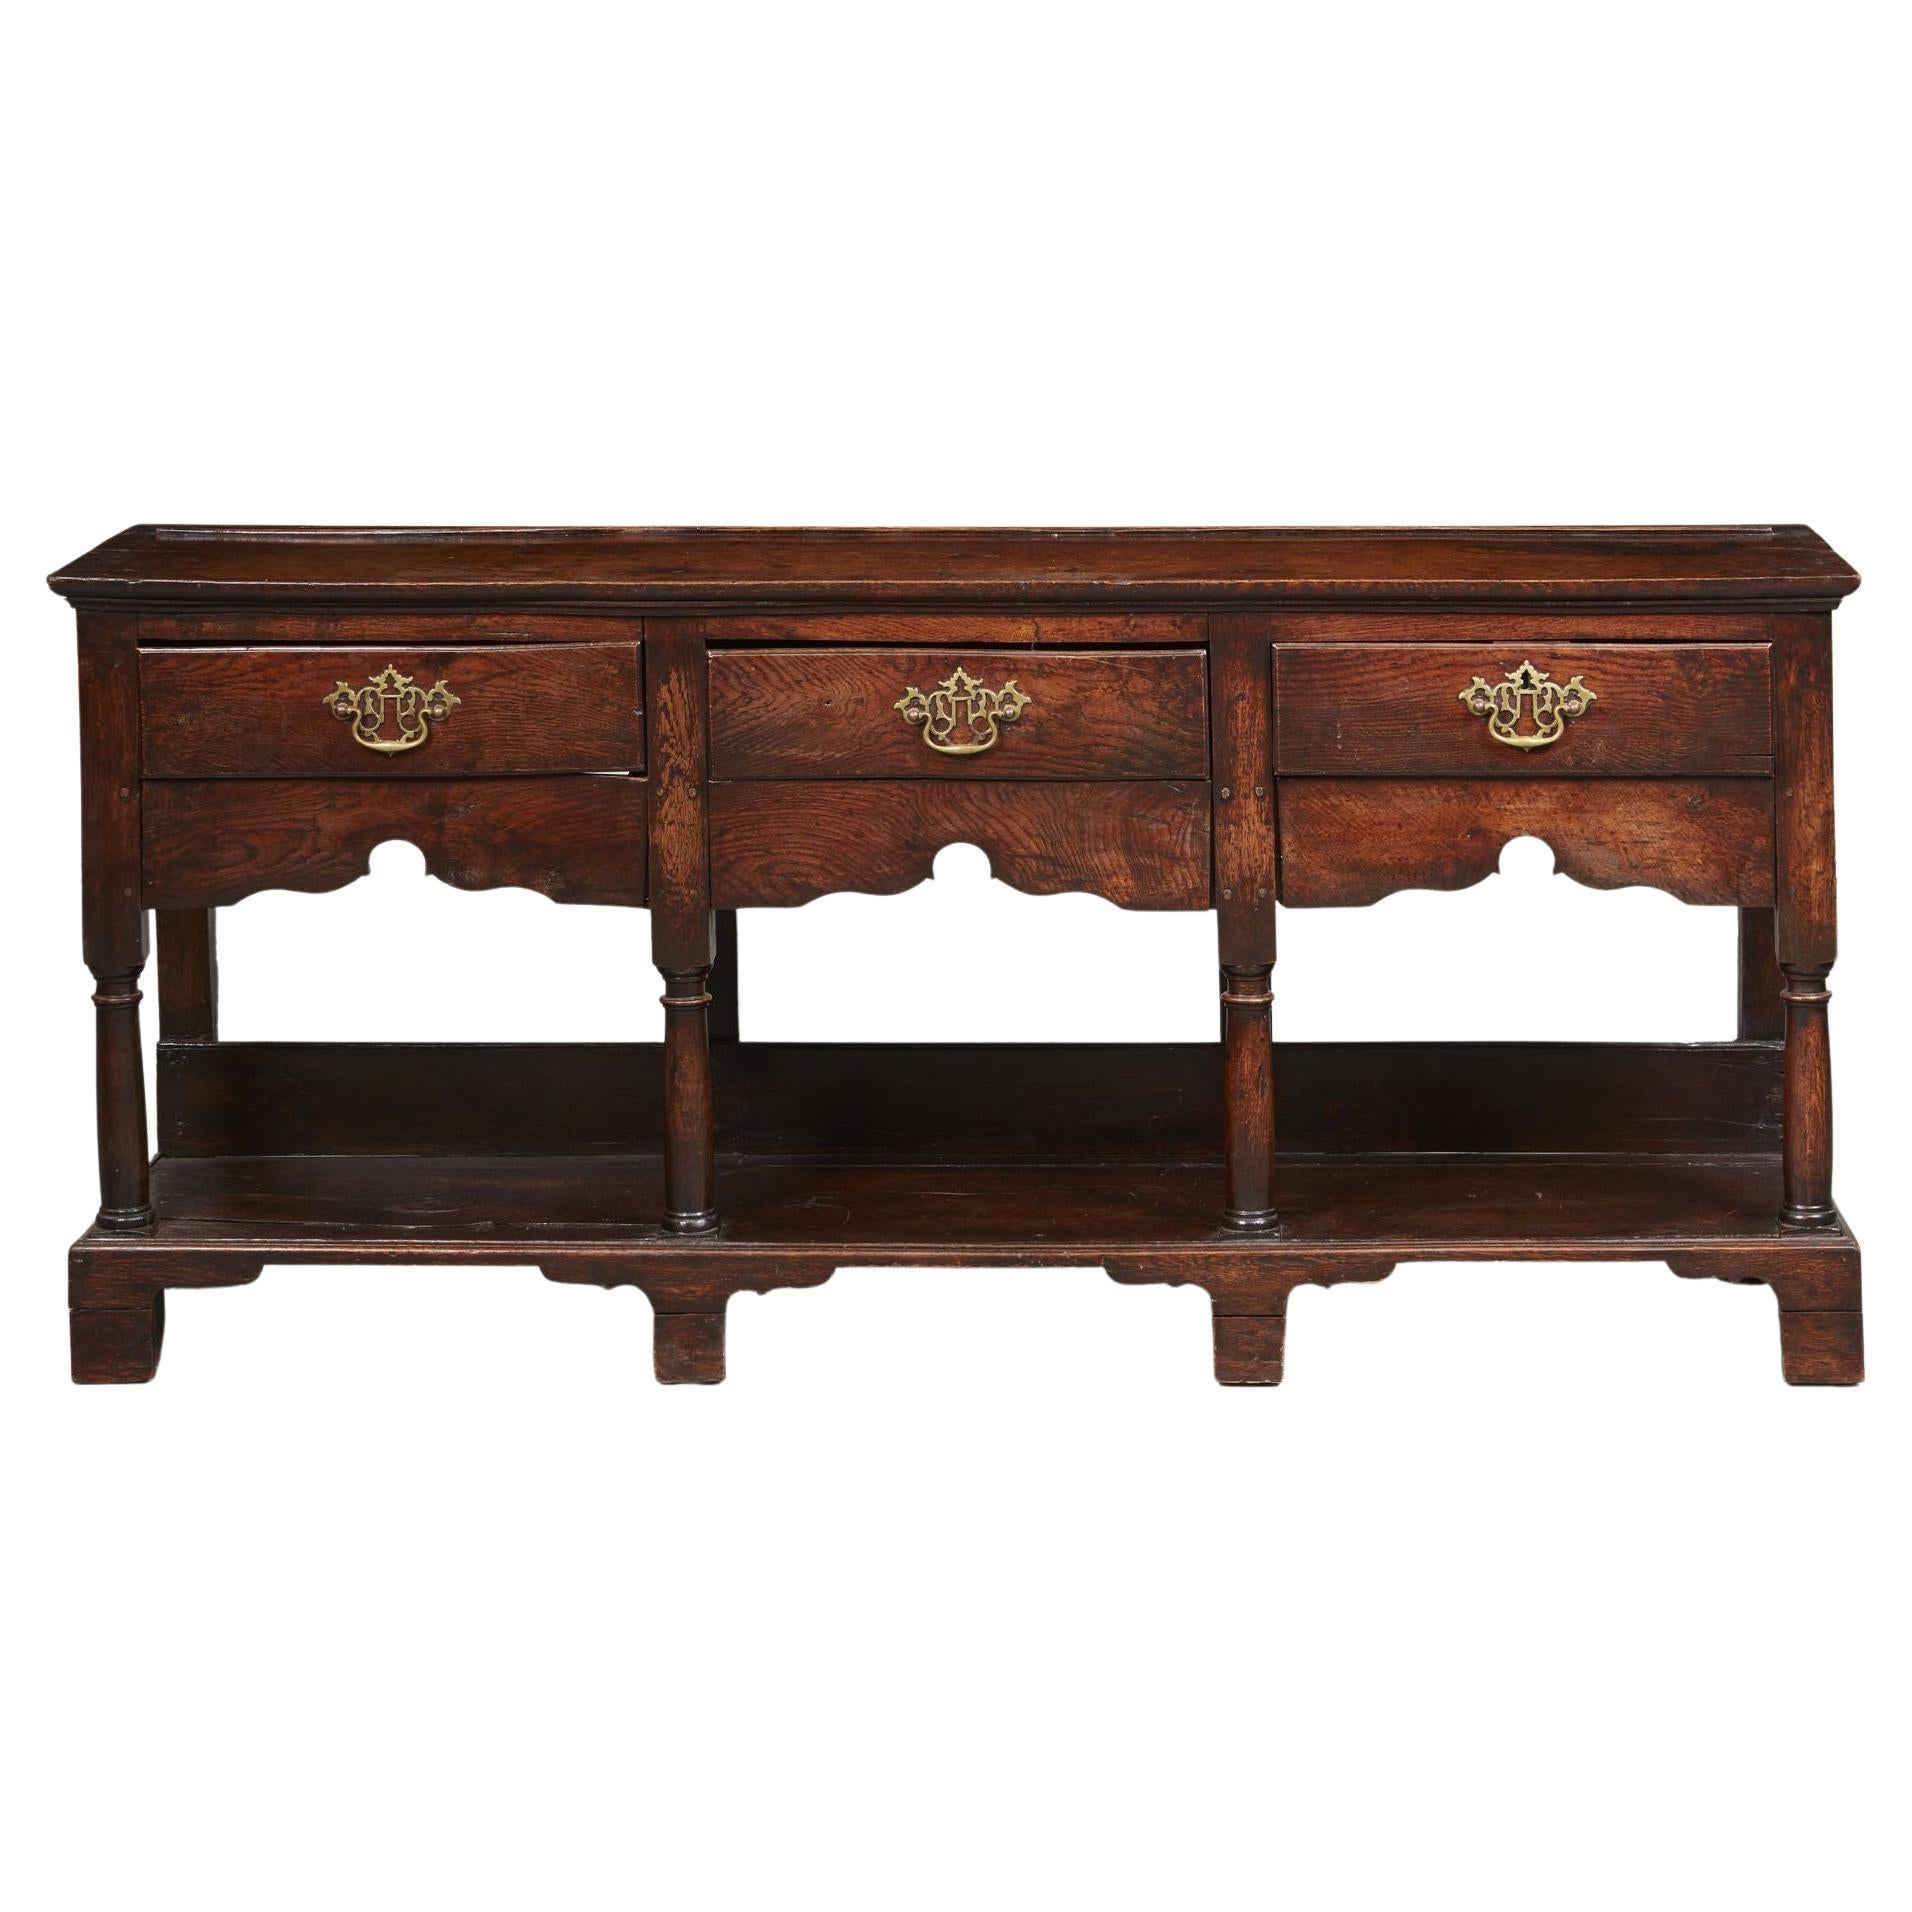 18th c. English Low Dresser with Potboard Base For Sale